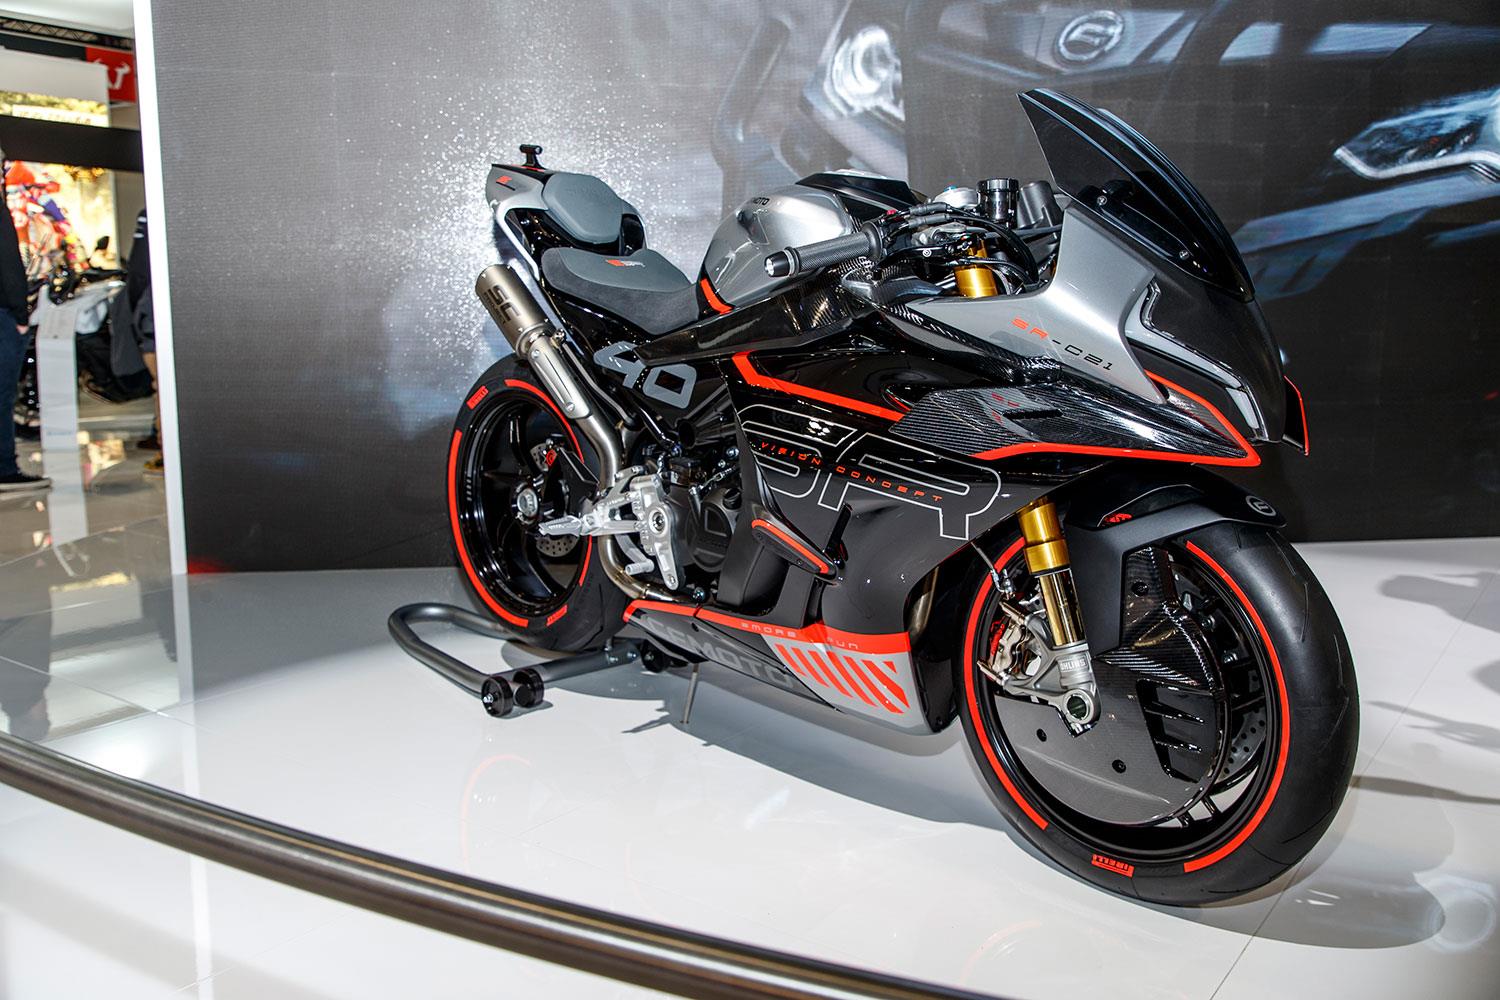 Cfmoto Get Serious With New Track Focussed Sr C21 Sportsbike Concept Mcn